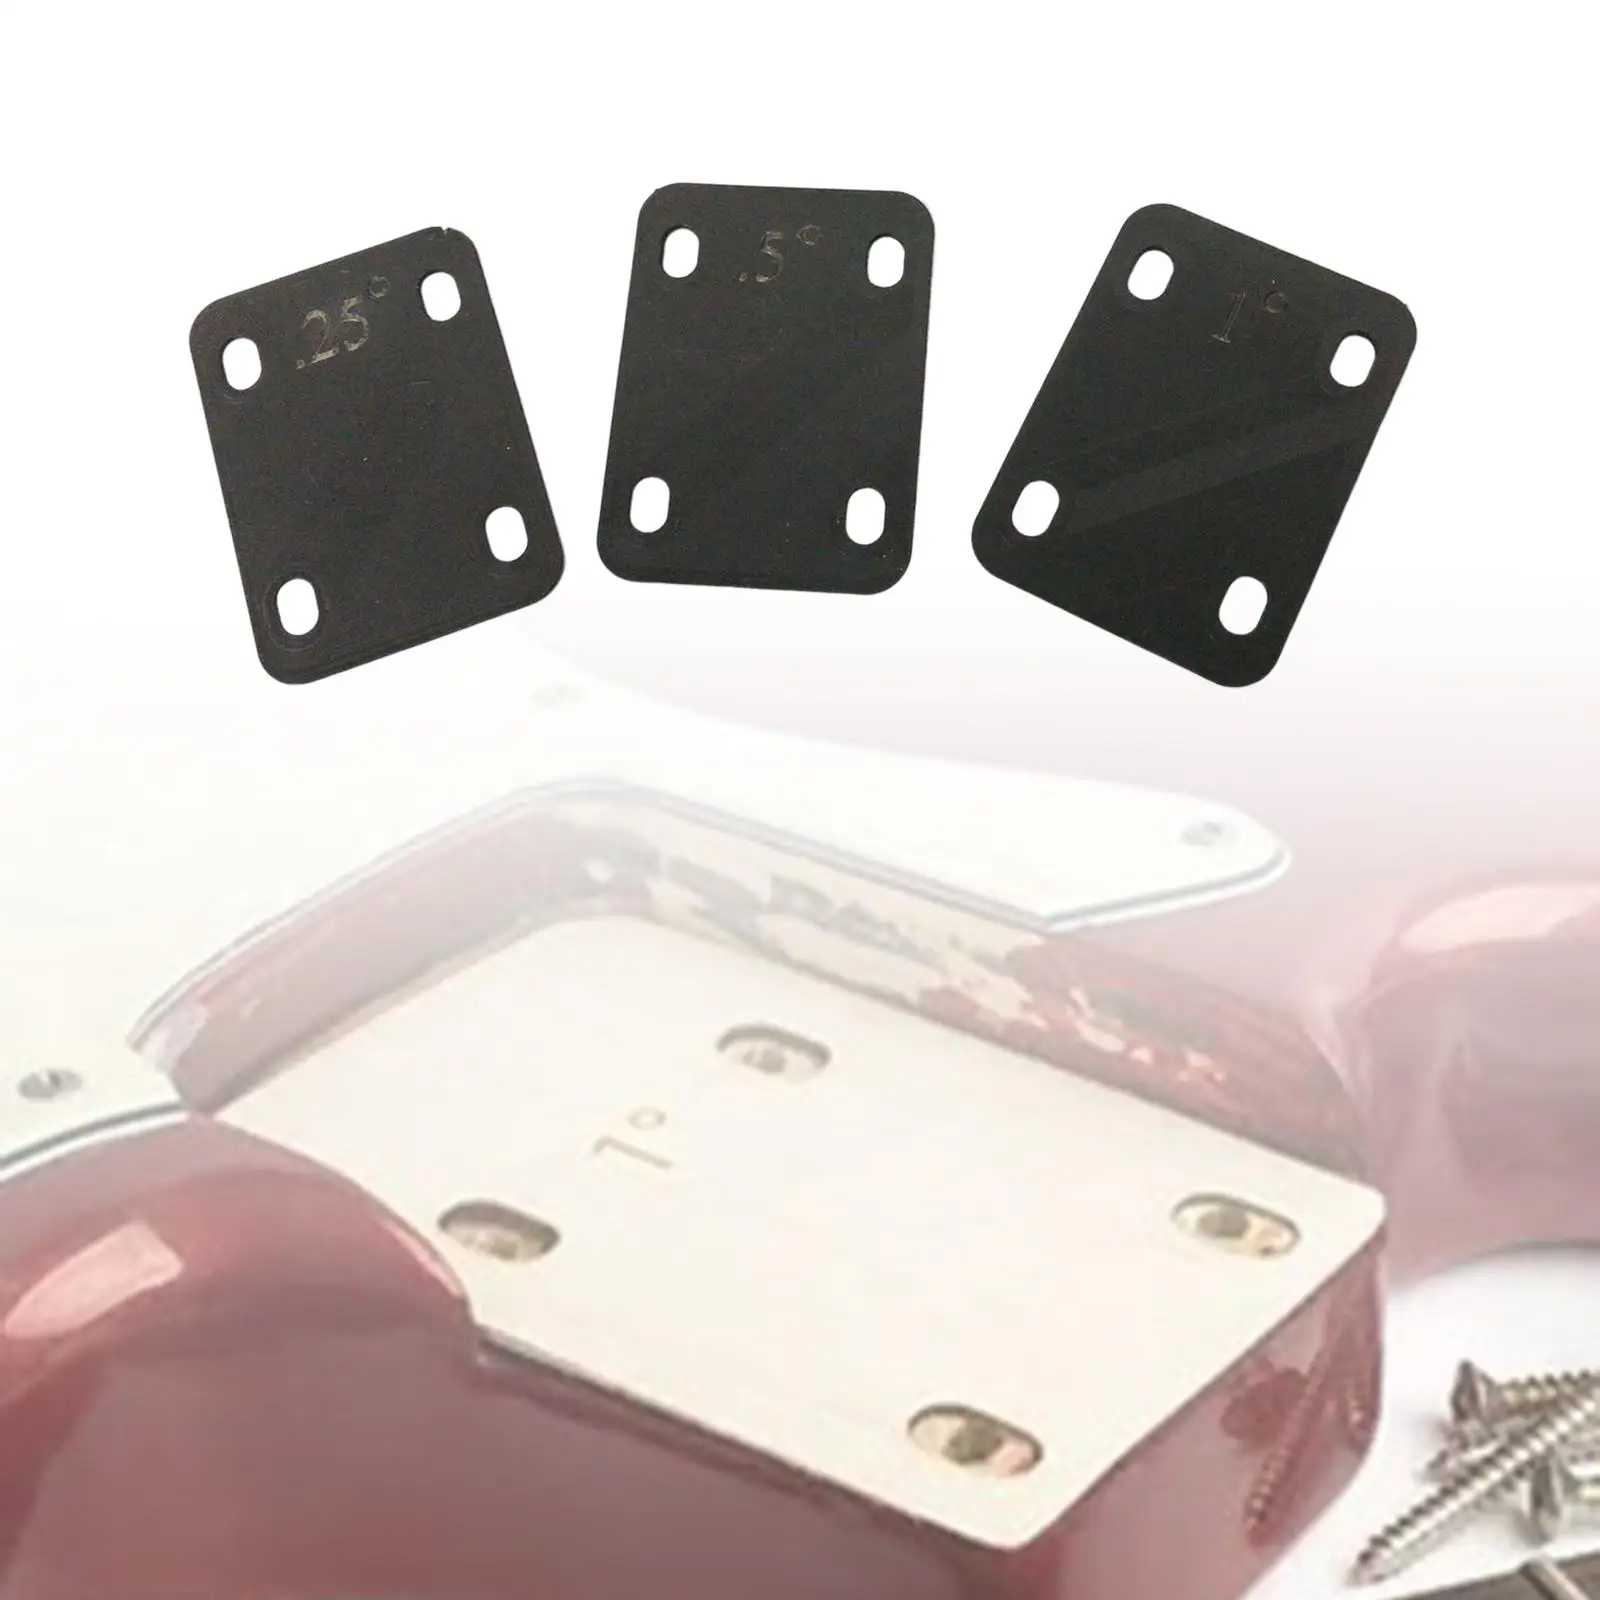 3 Pieces 4 Holes Neck Plate Gasket Replaces Accessory Protective Kits Neckplate Cushion Shim Durable for Electric Guitar Bass